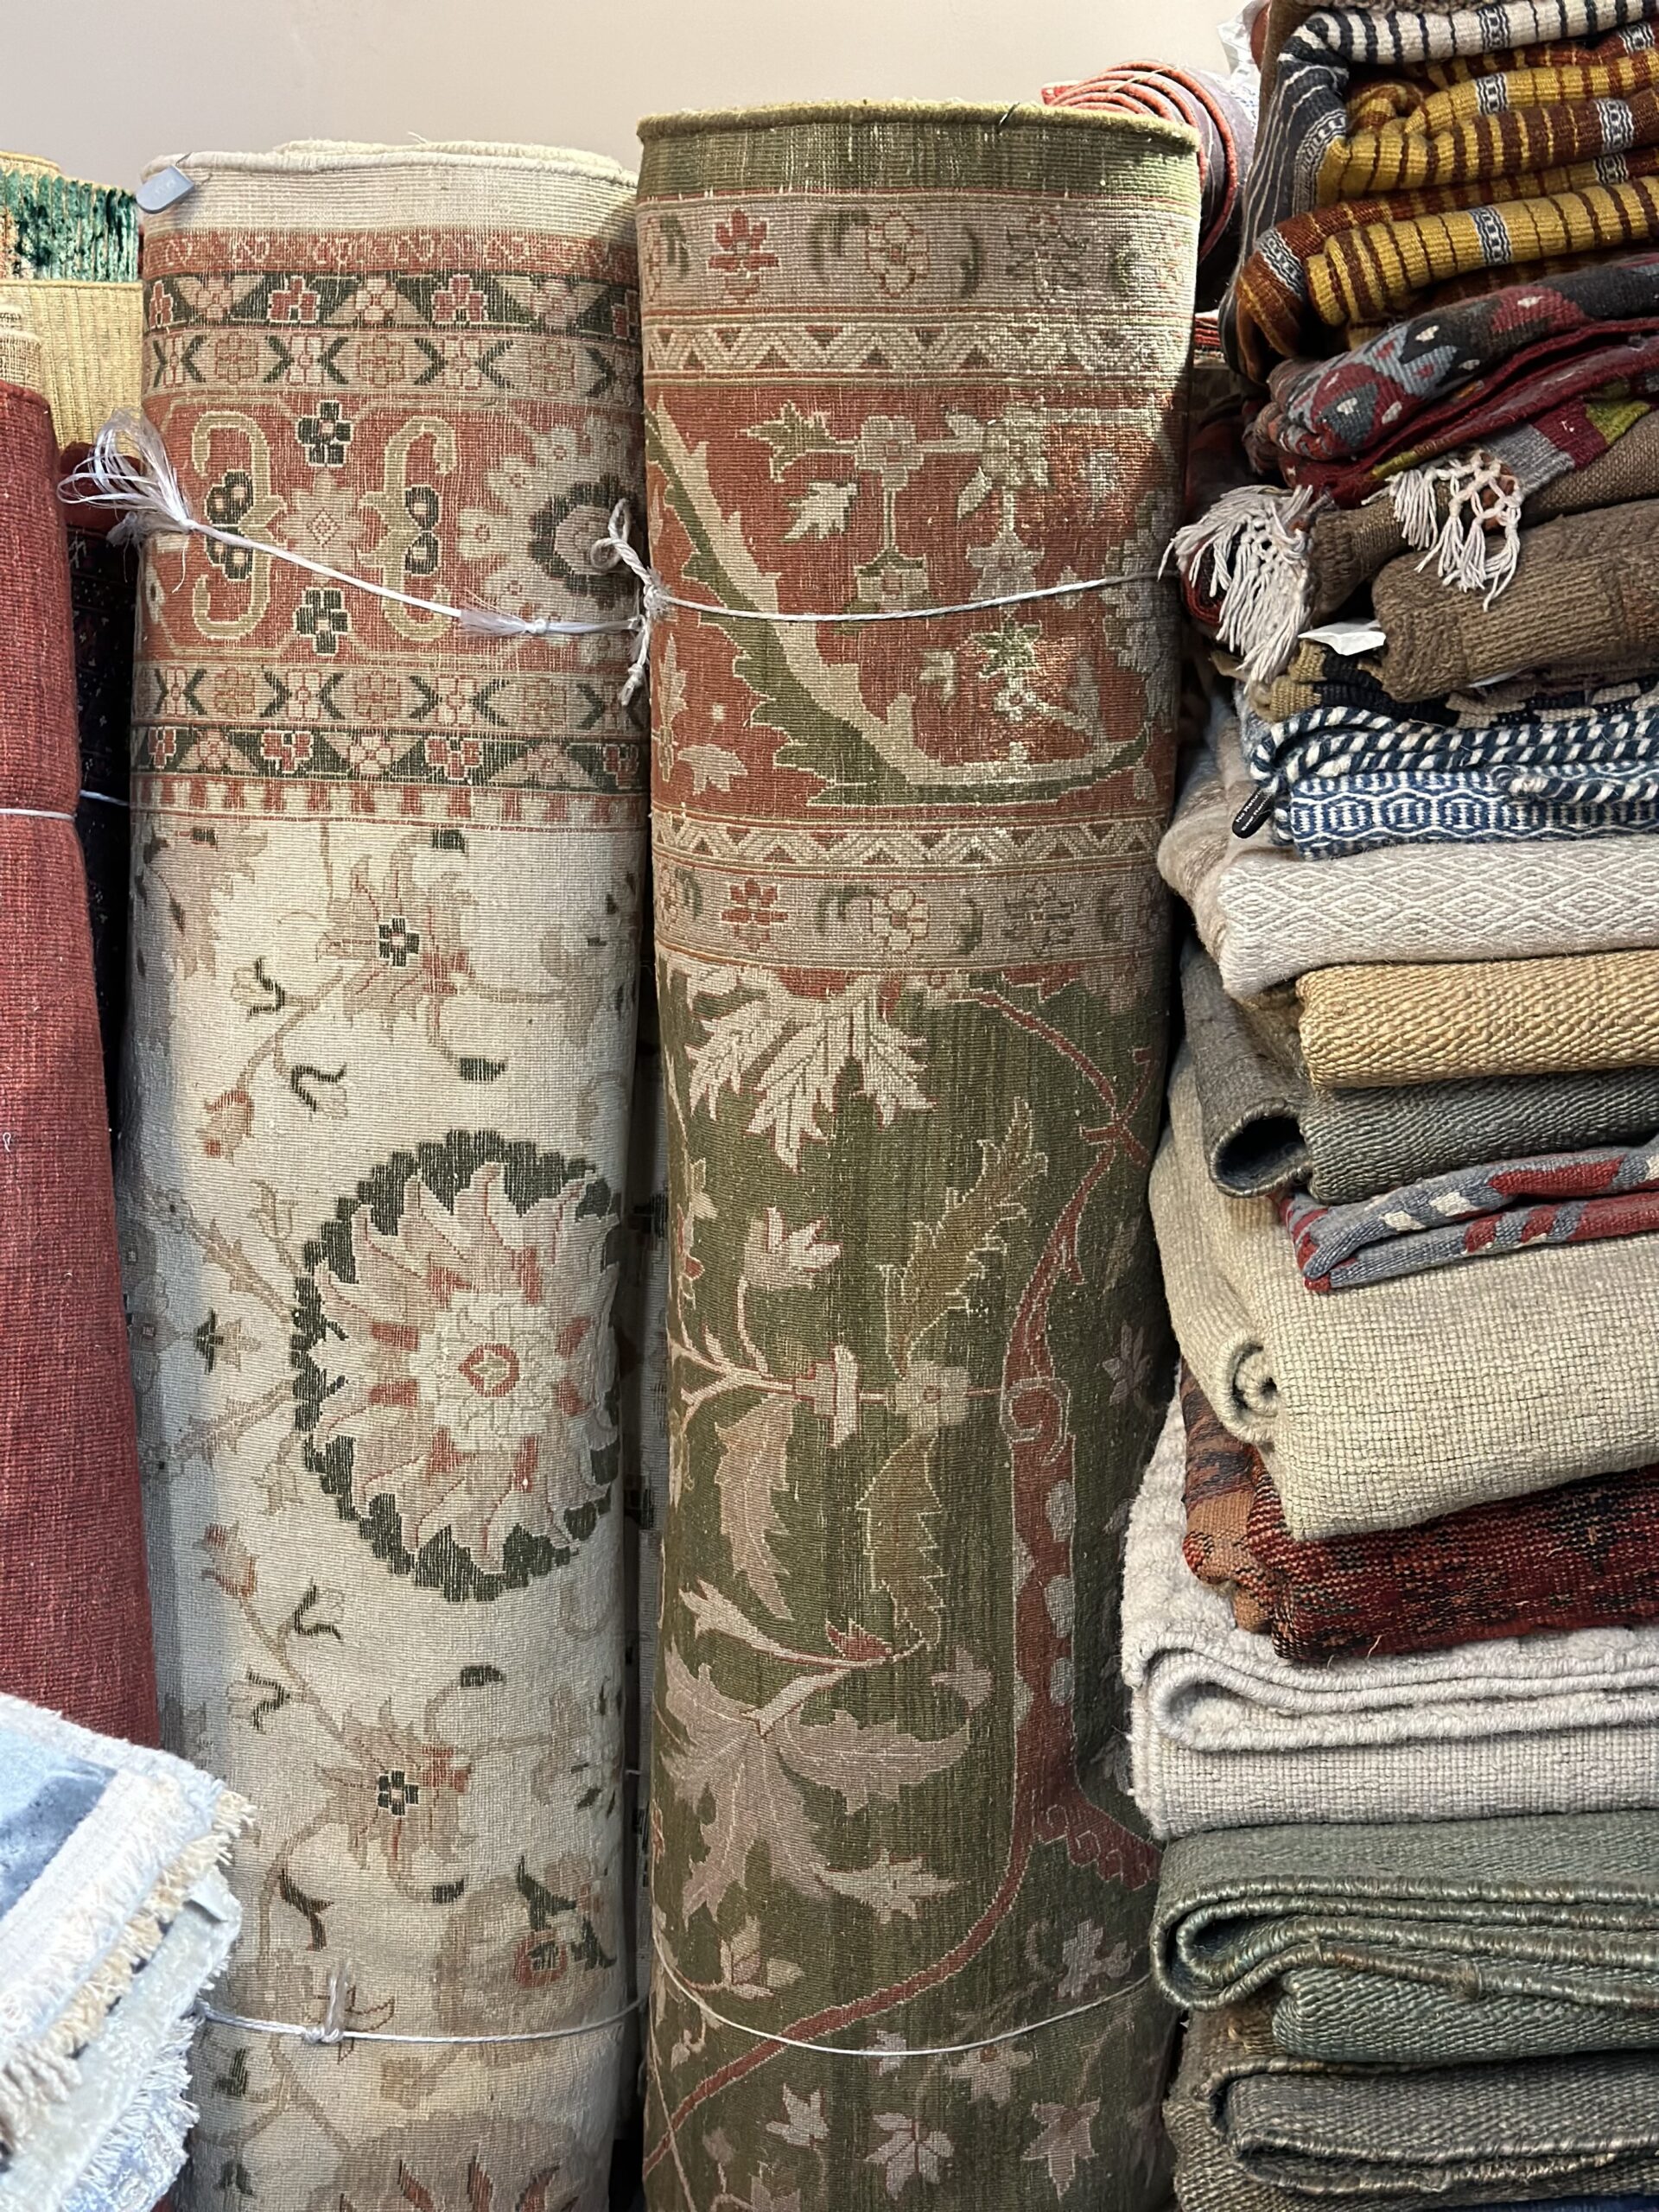 Two hand knotted rugs rolled up along with a stack of other rugs